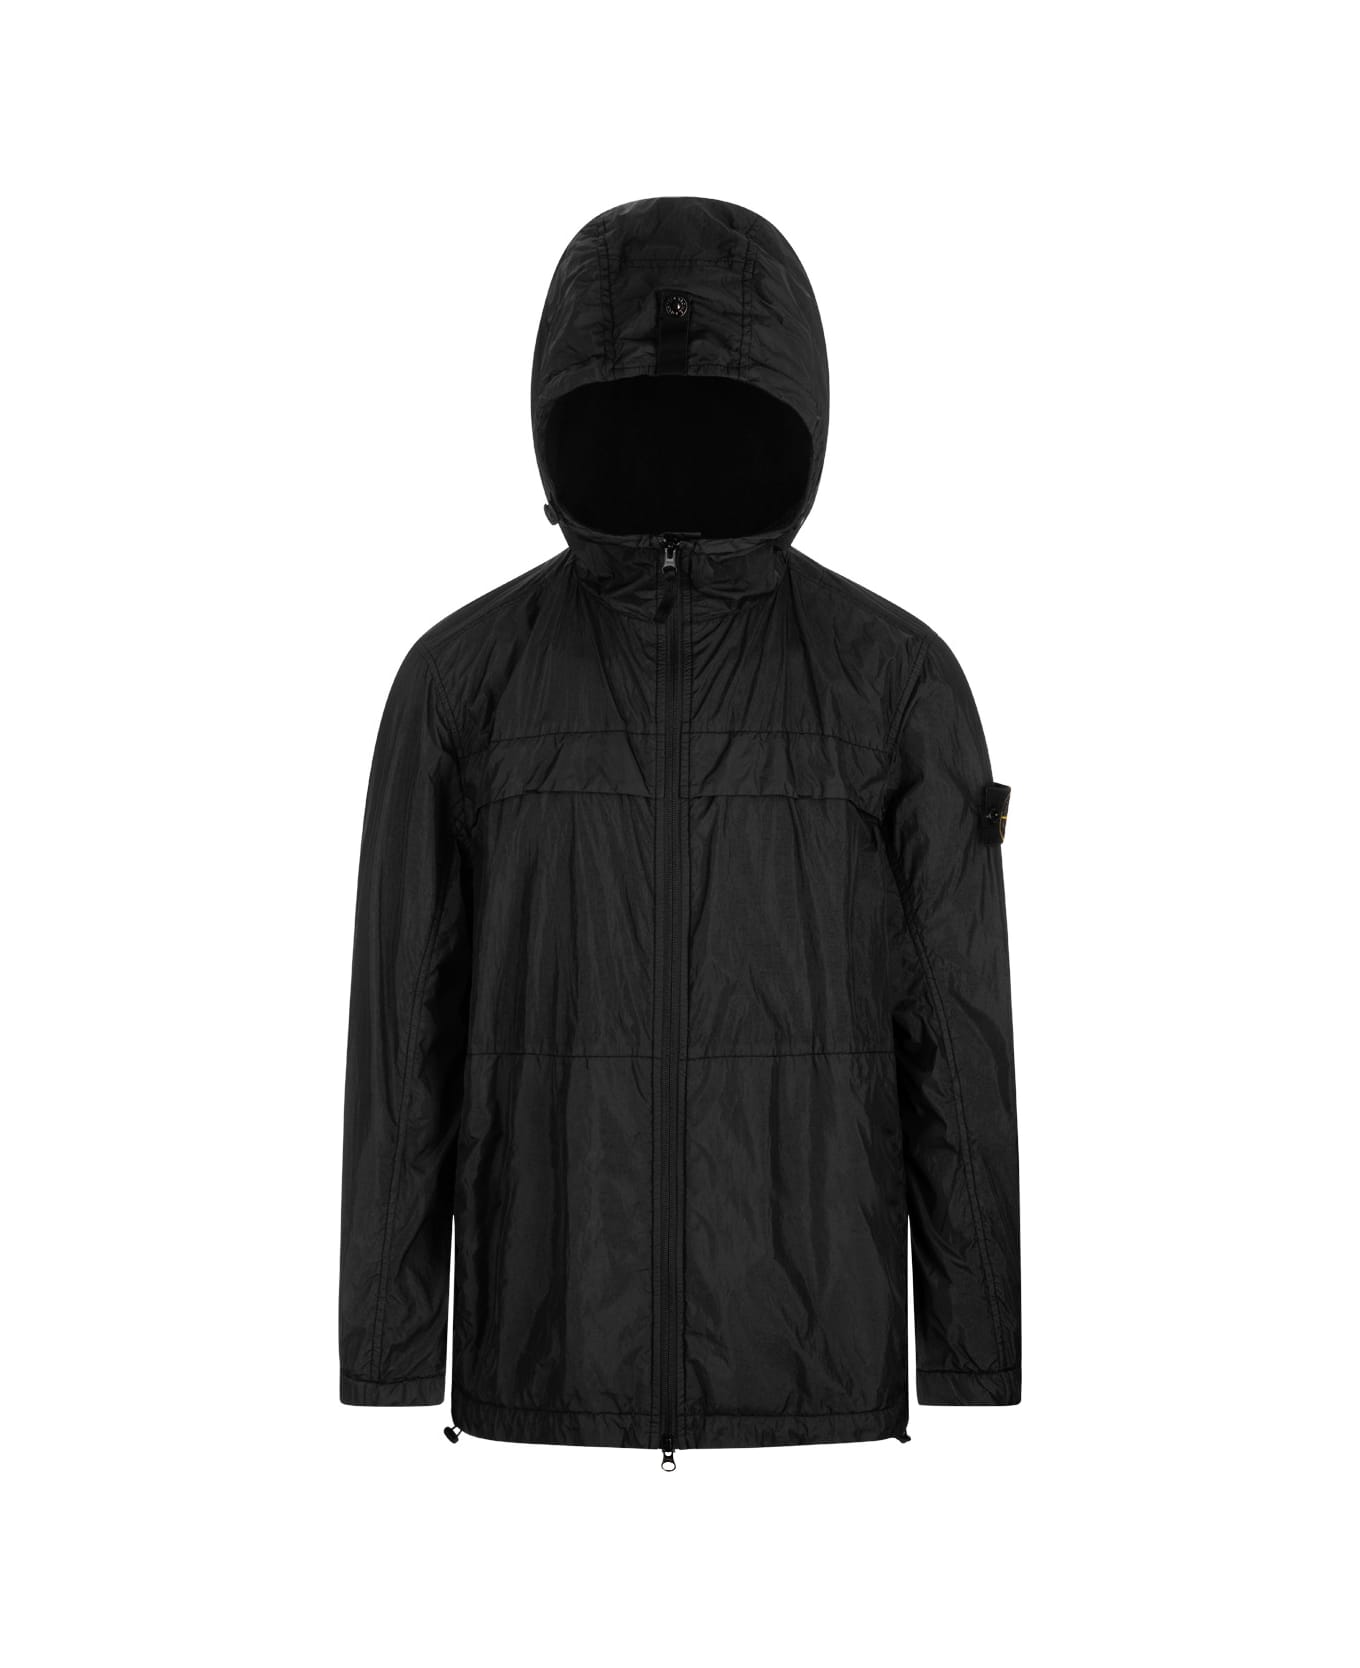 Stone Island Garment Dyed Crinkle Reps R-ny Lightweight Jacket In Black - Black